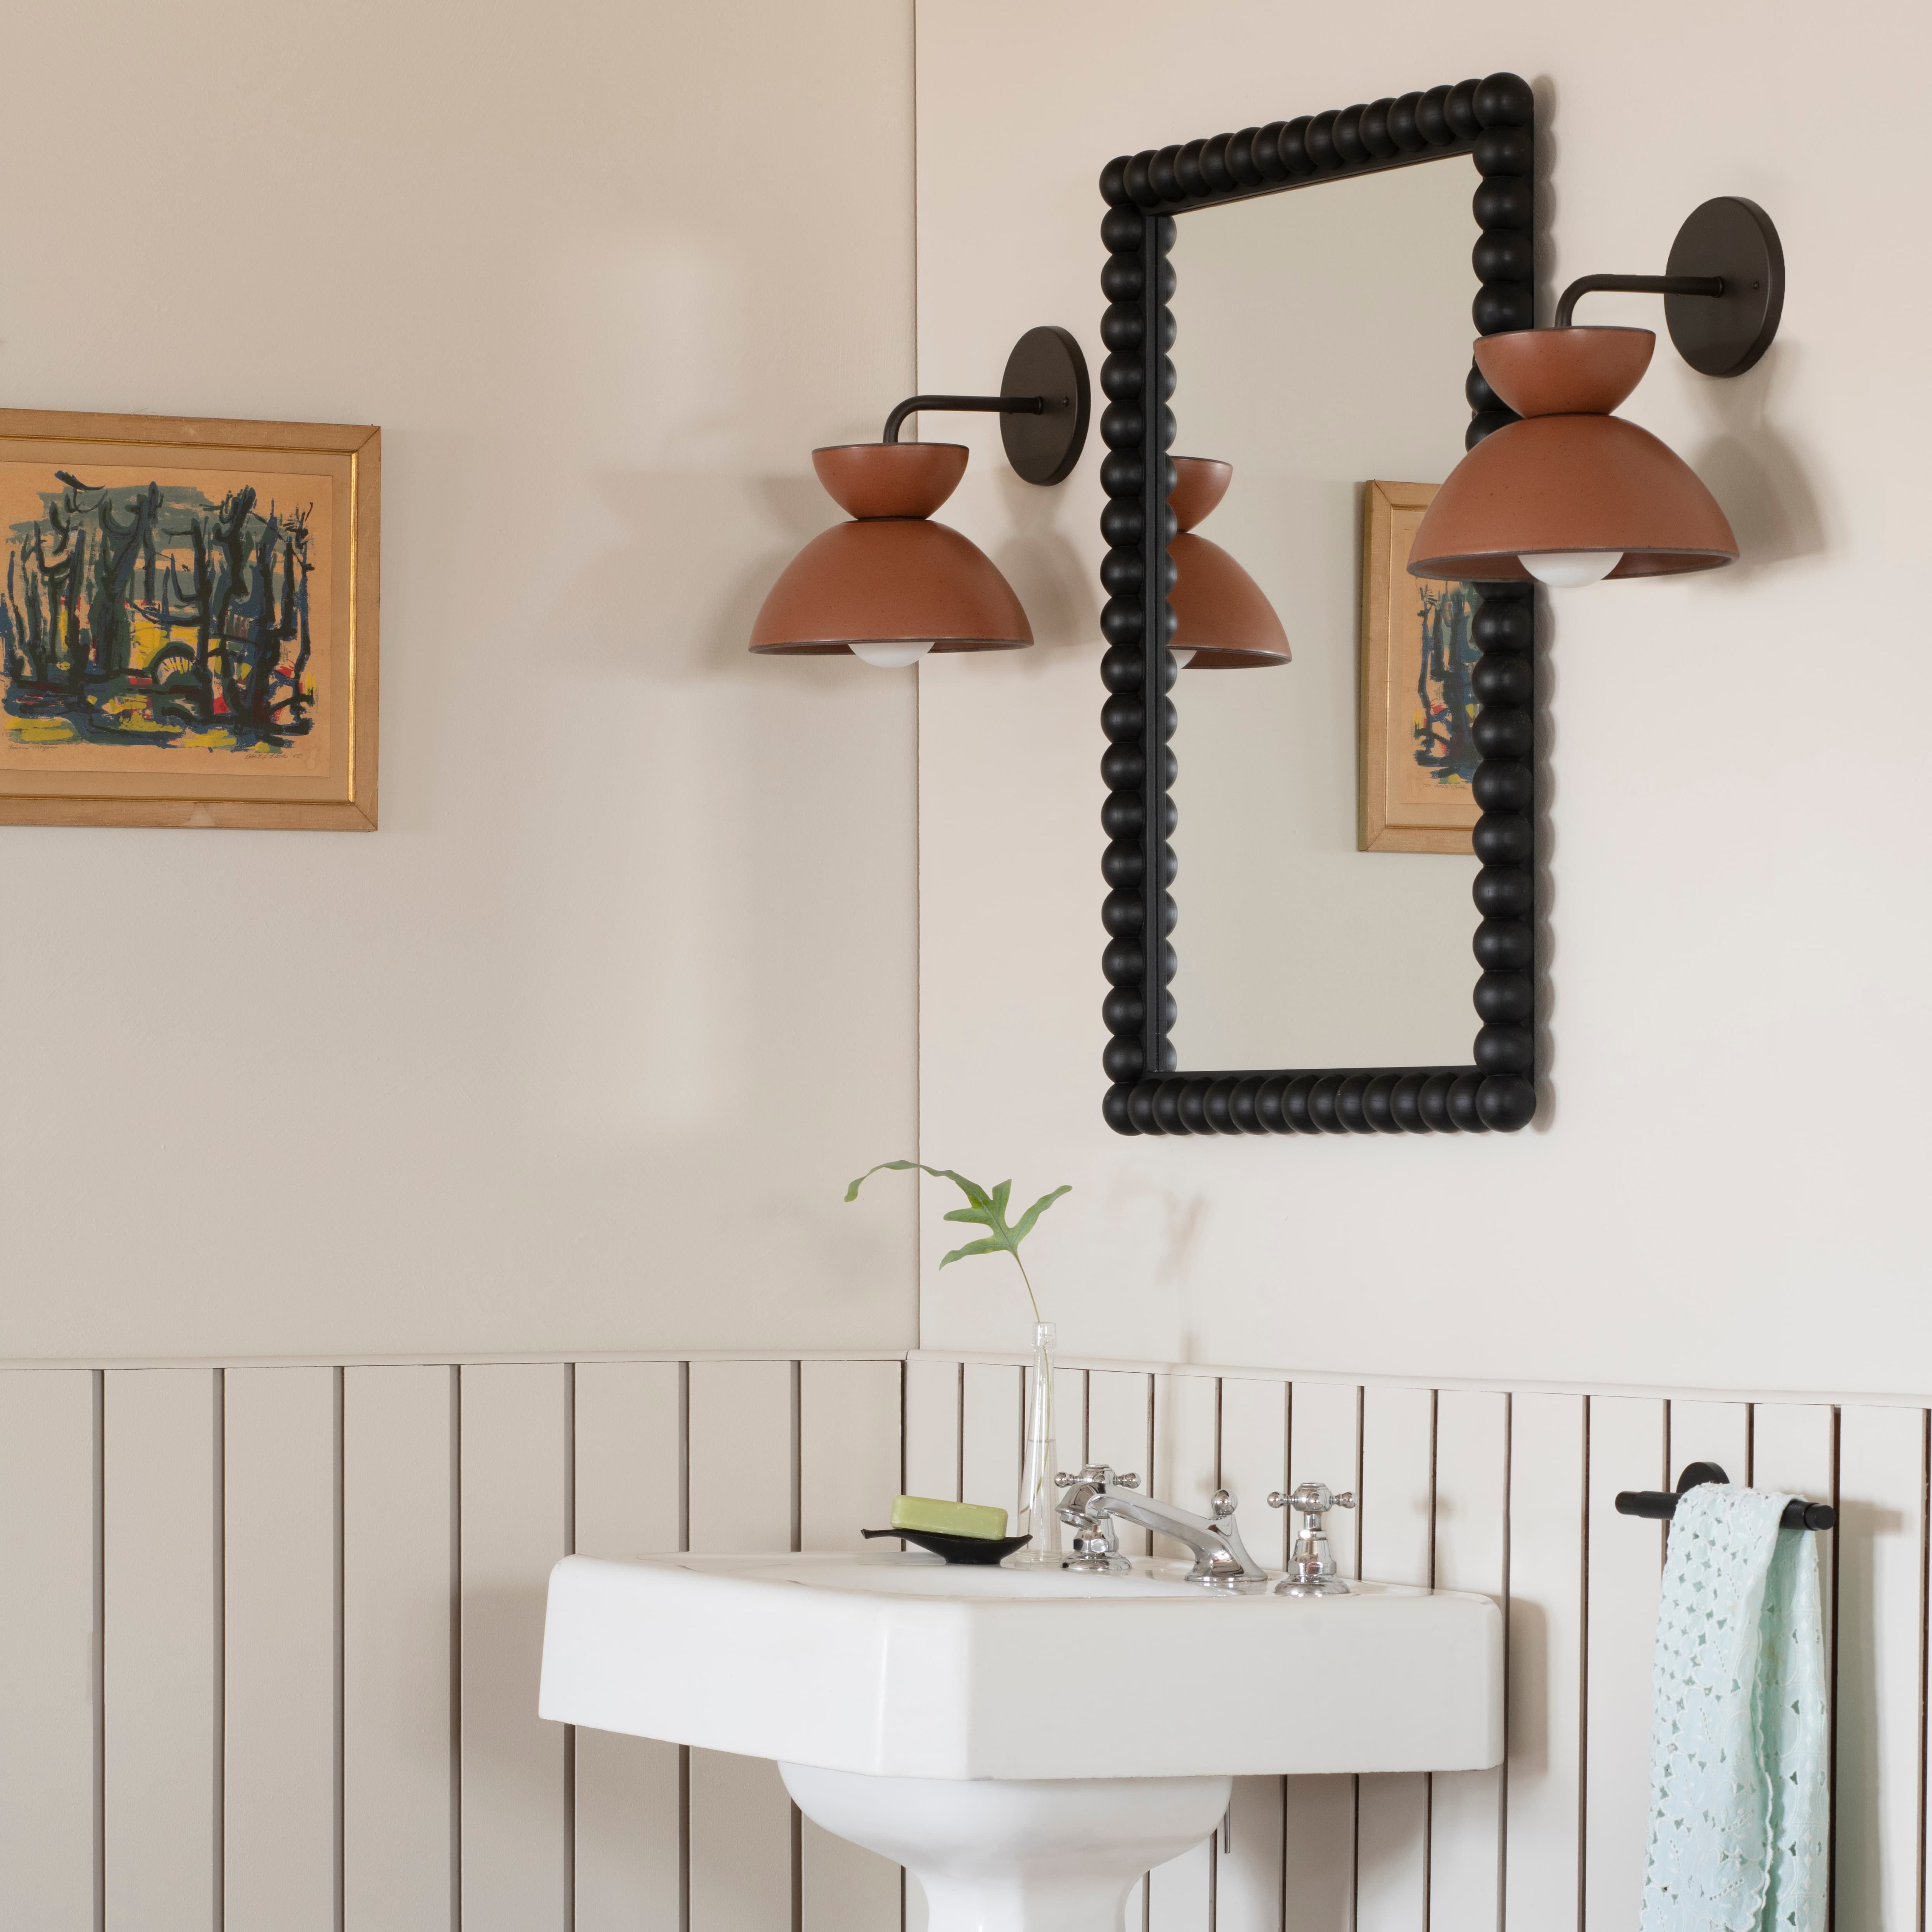 Two light fixtures made from amaro East Fork bowls surround a mirror in a black frame above a pedestal sink 